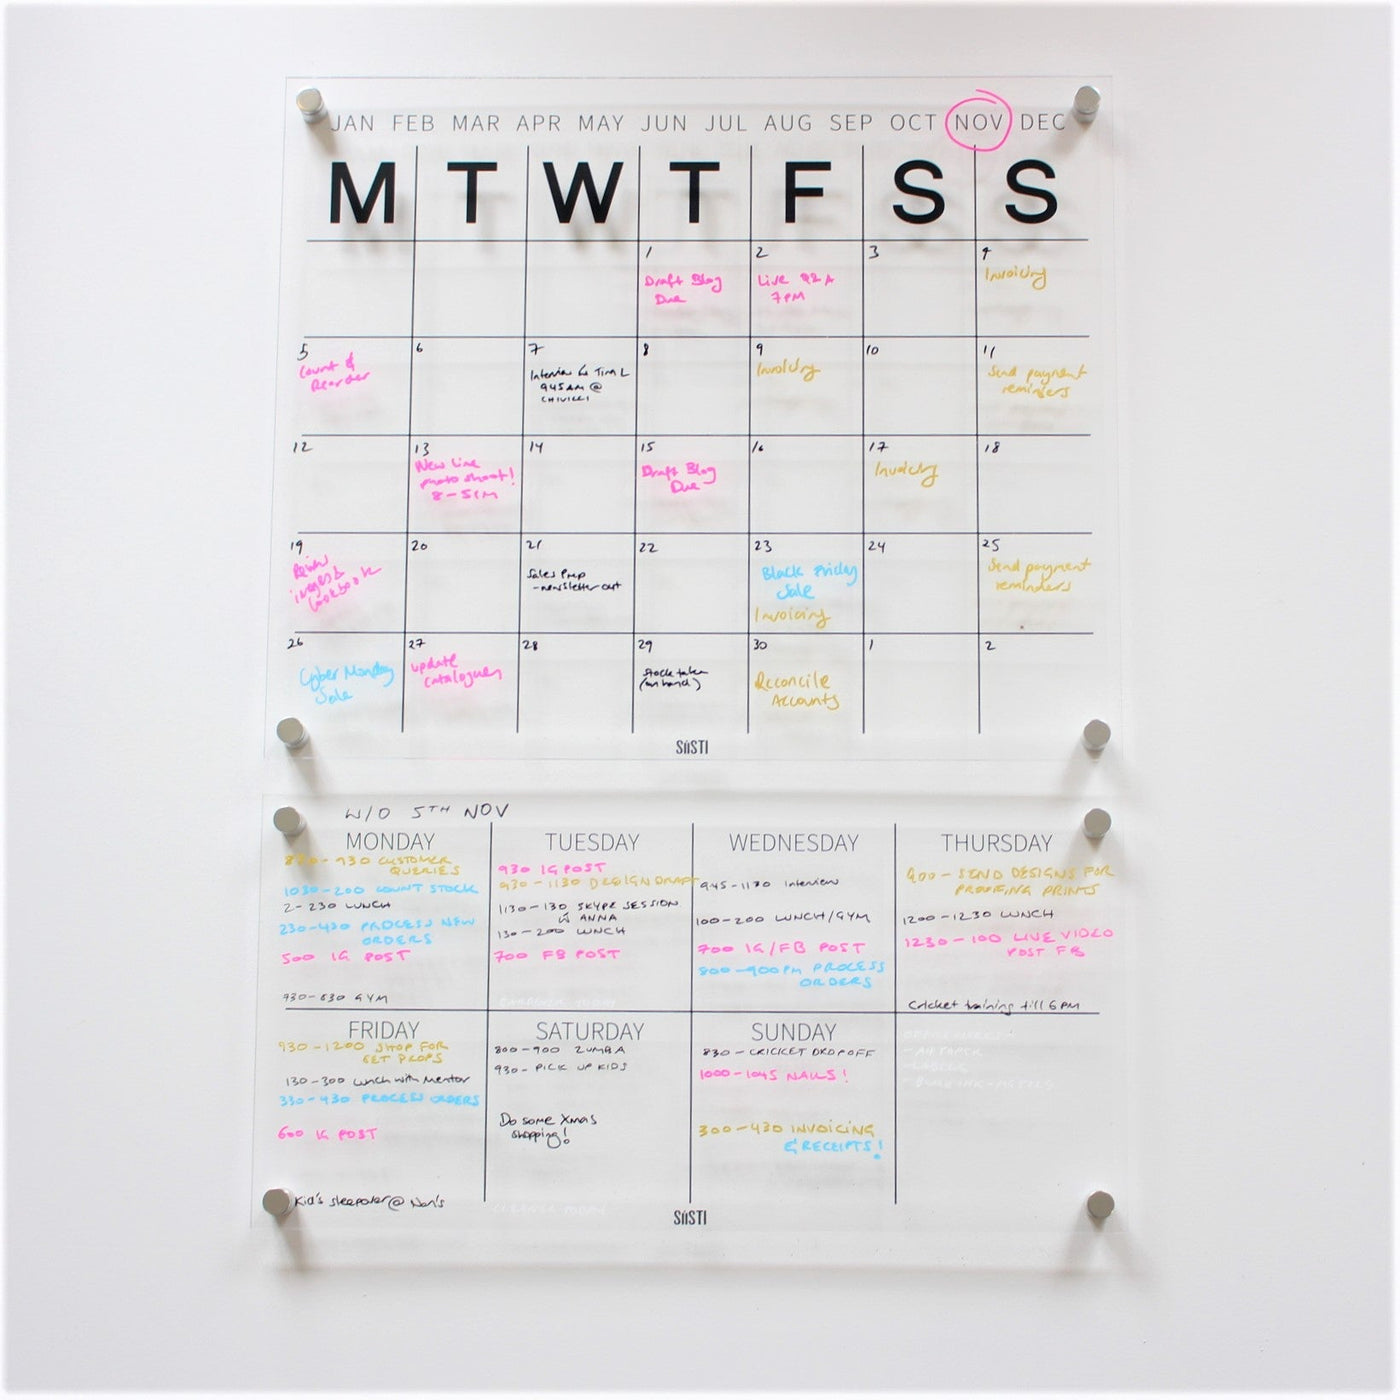 Siisti clear acrylic wall calendar and weekly planner displayed together